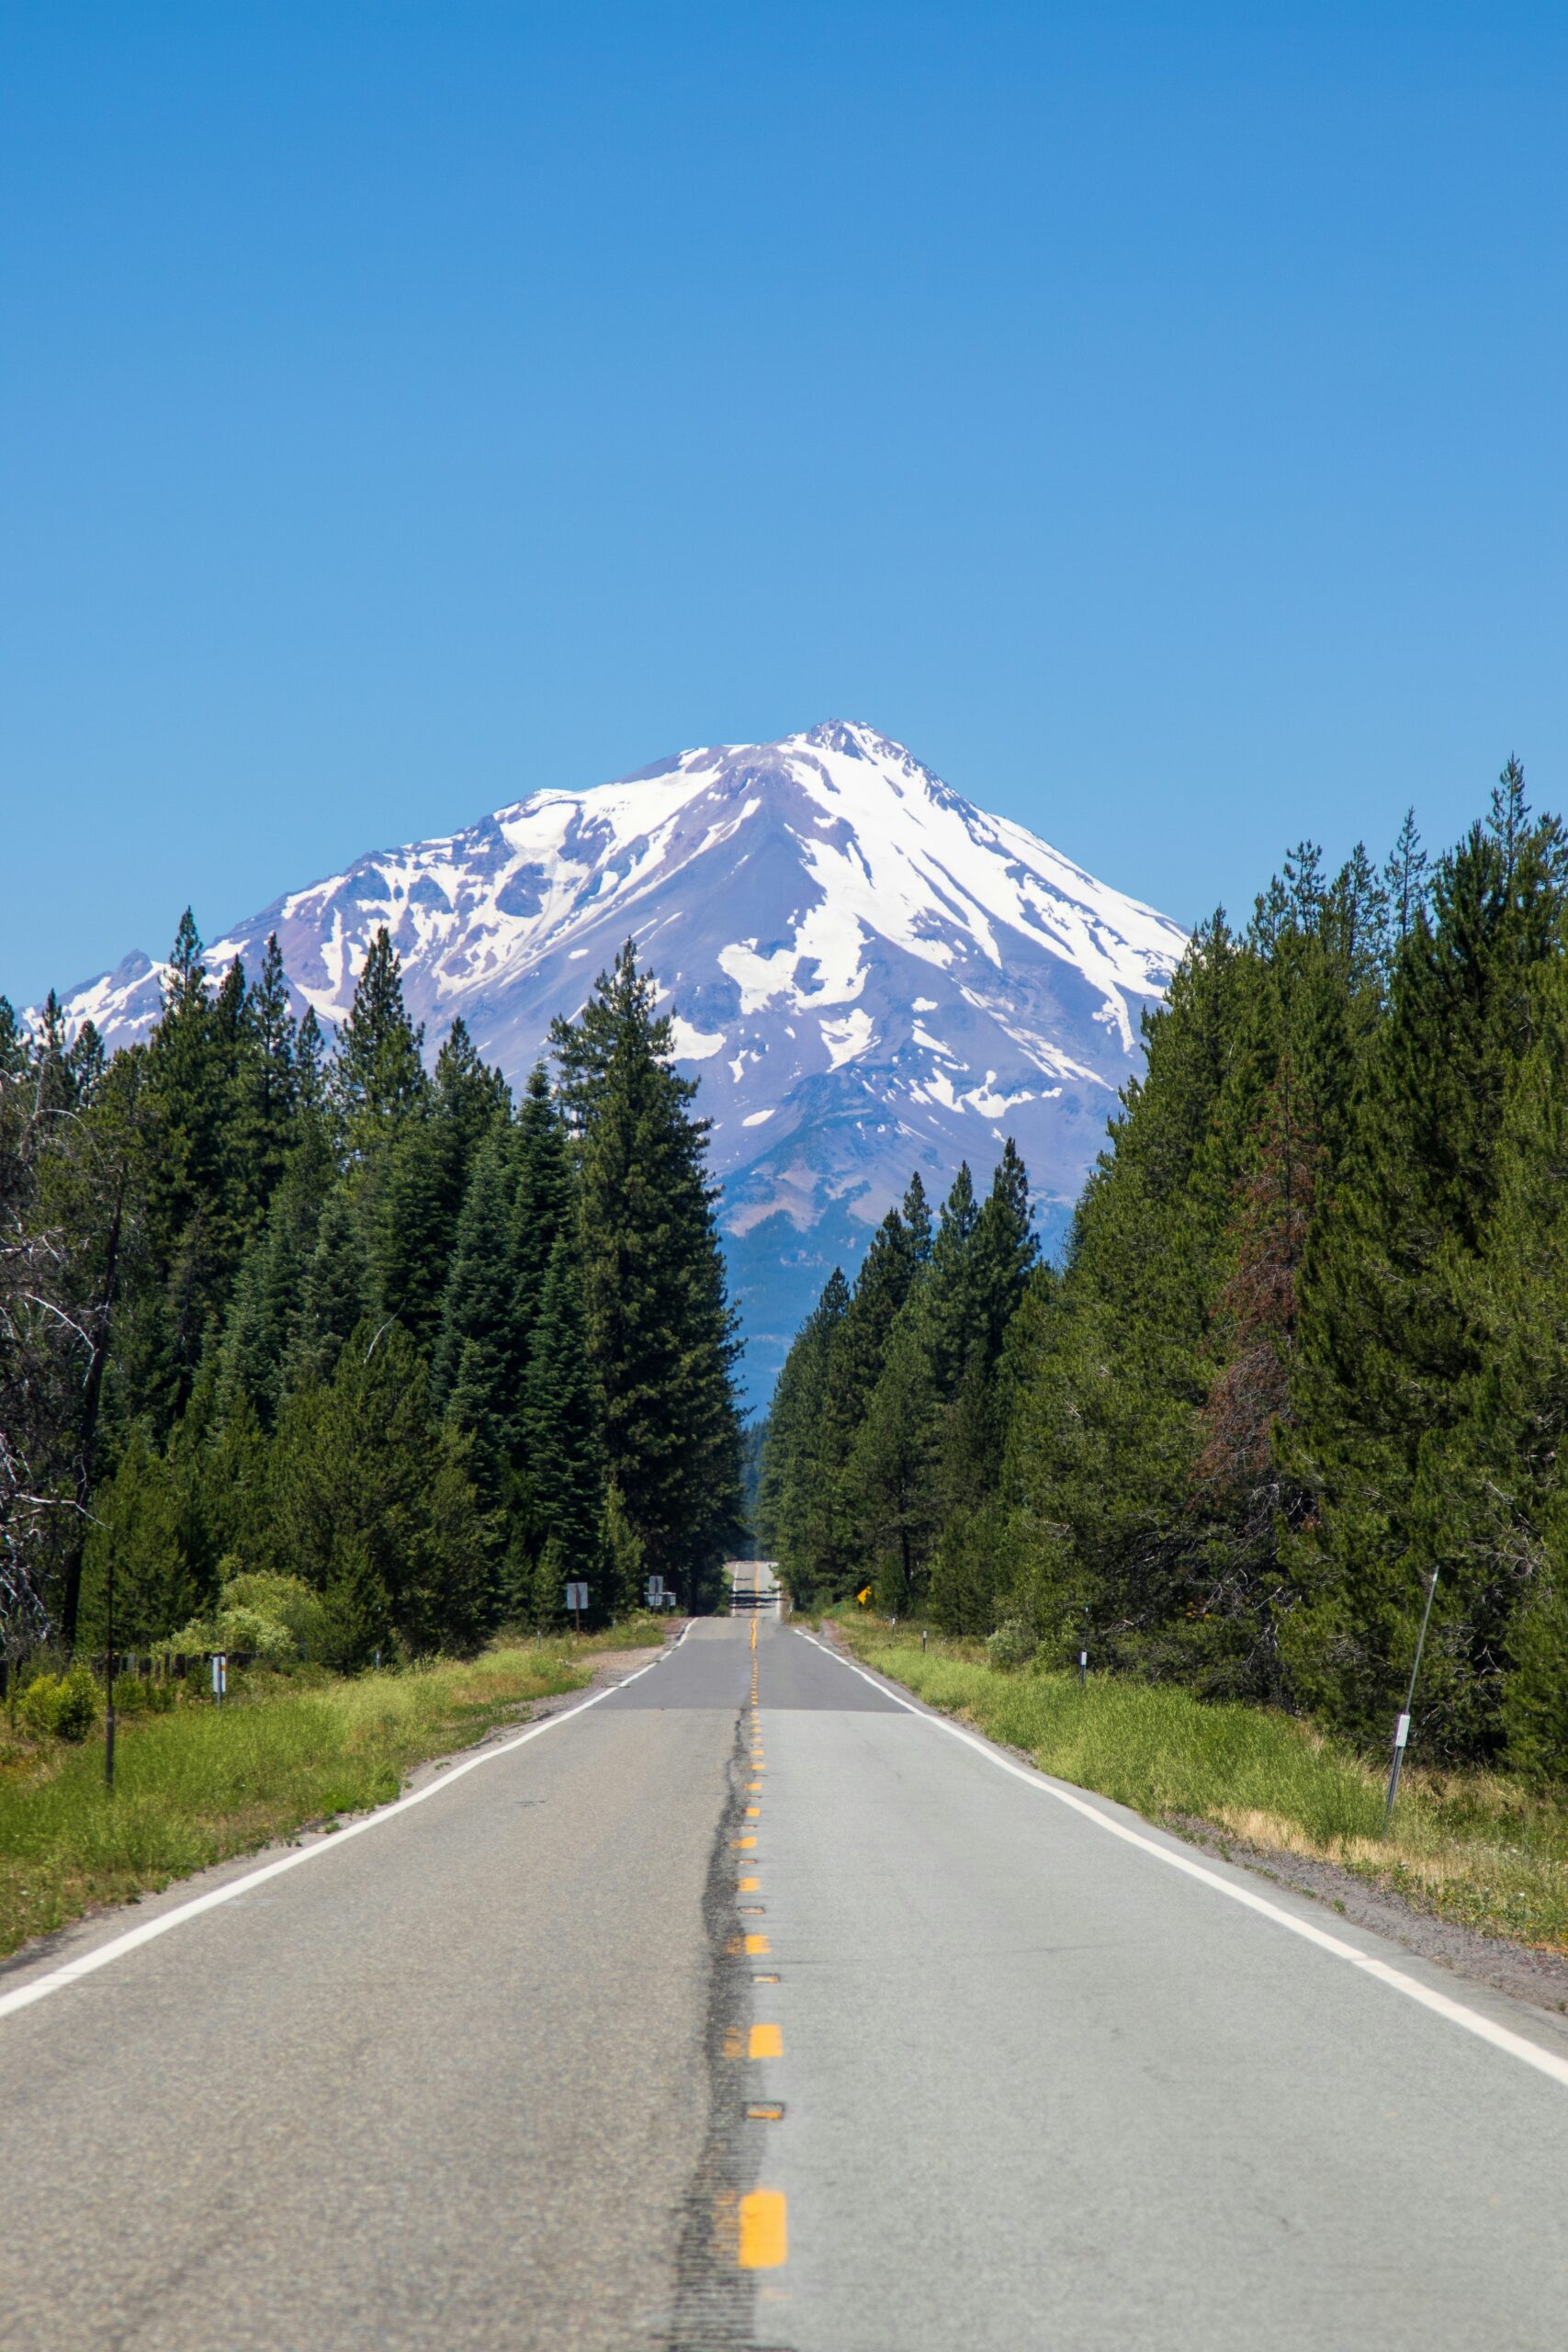 Which Campsites Are Available Near Mount Shasta?